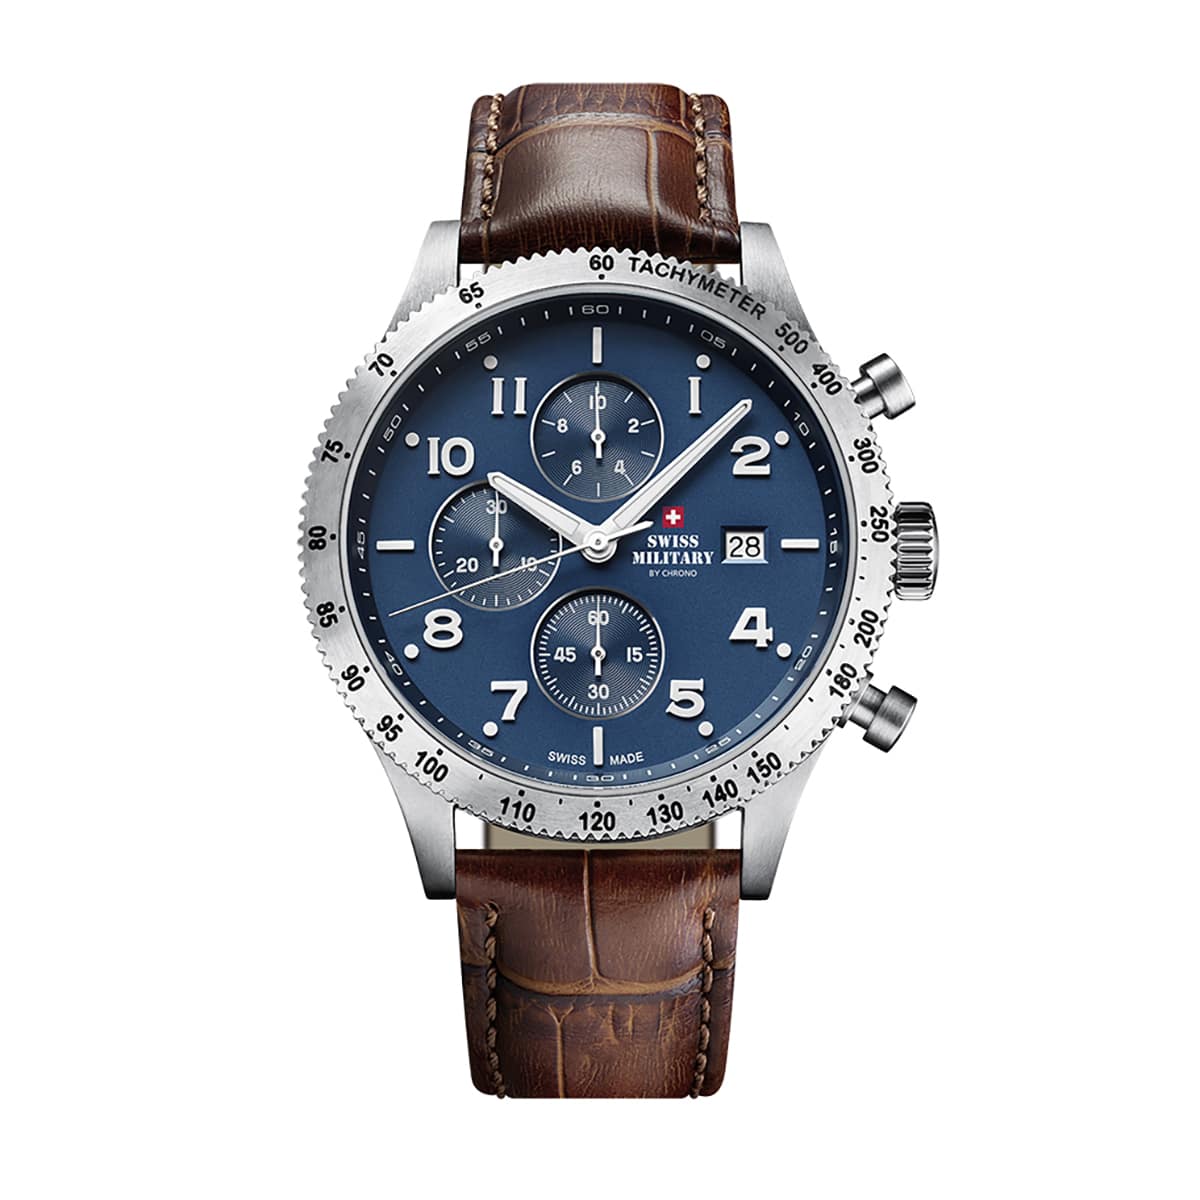 MONTRE SWISS MILITARY HOMME CHRONO CUIR